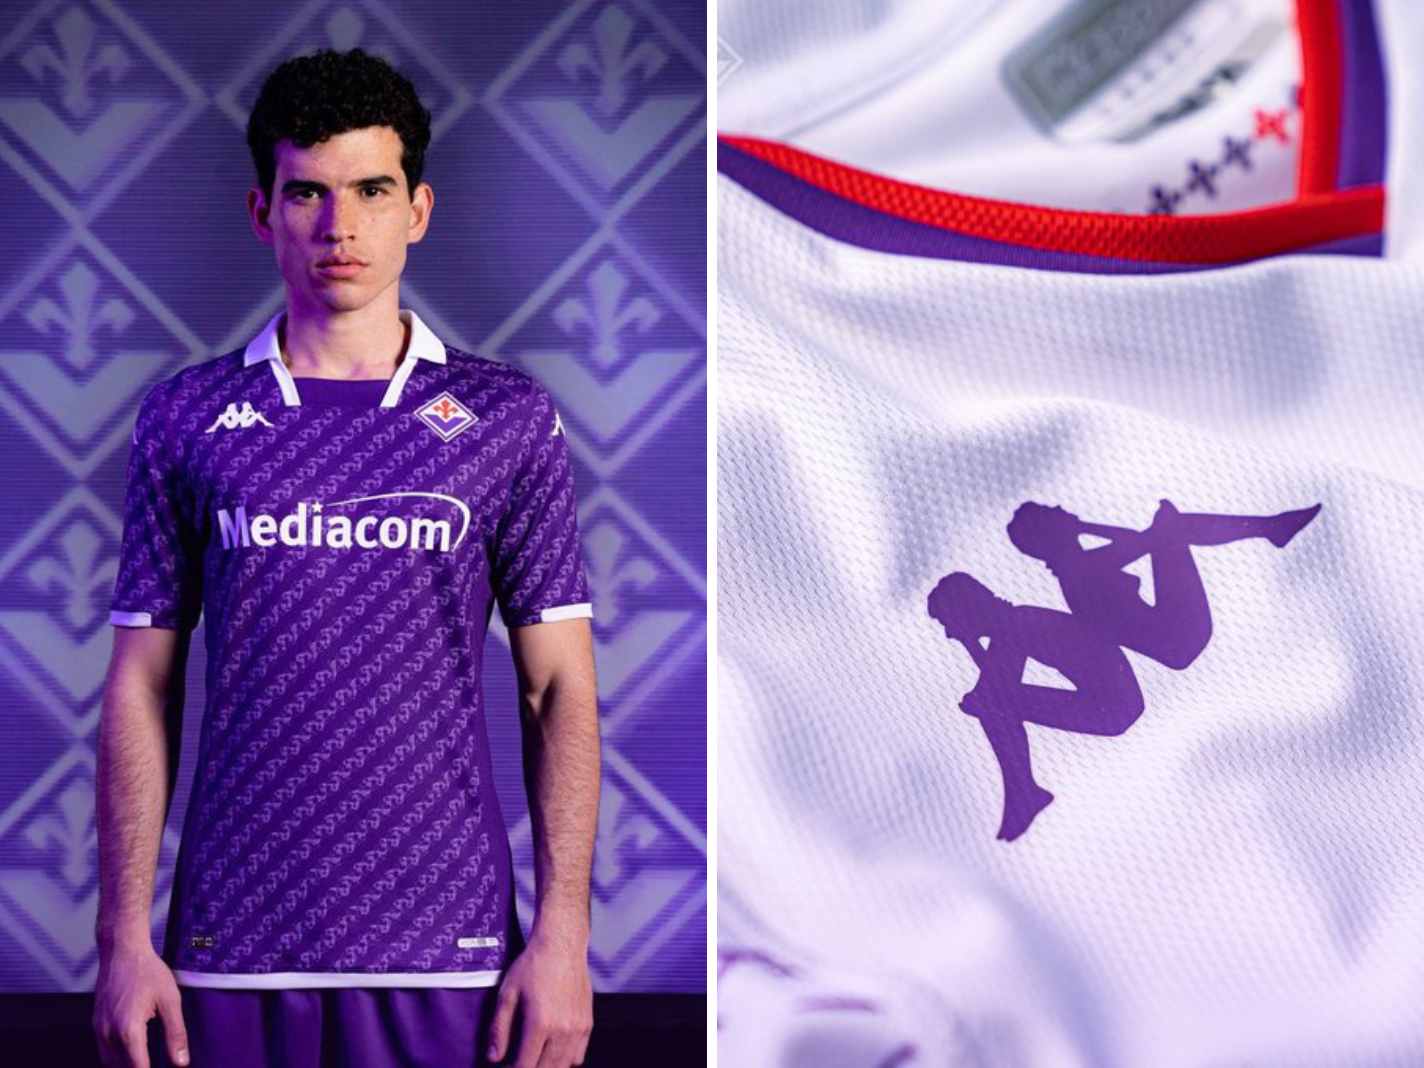 Fiorentina Stuns Fans with Extraordinary 23/24 Kit Designs